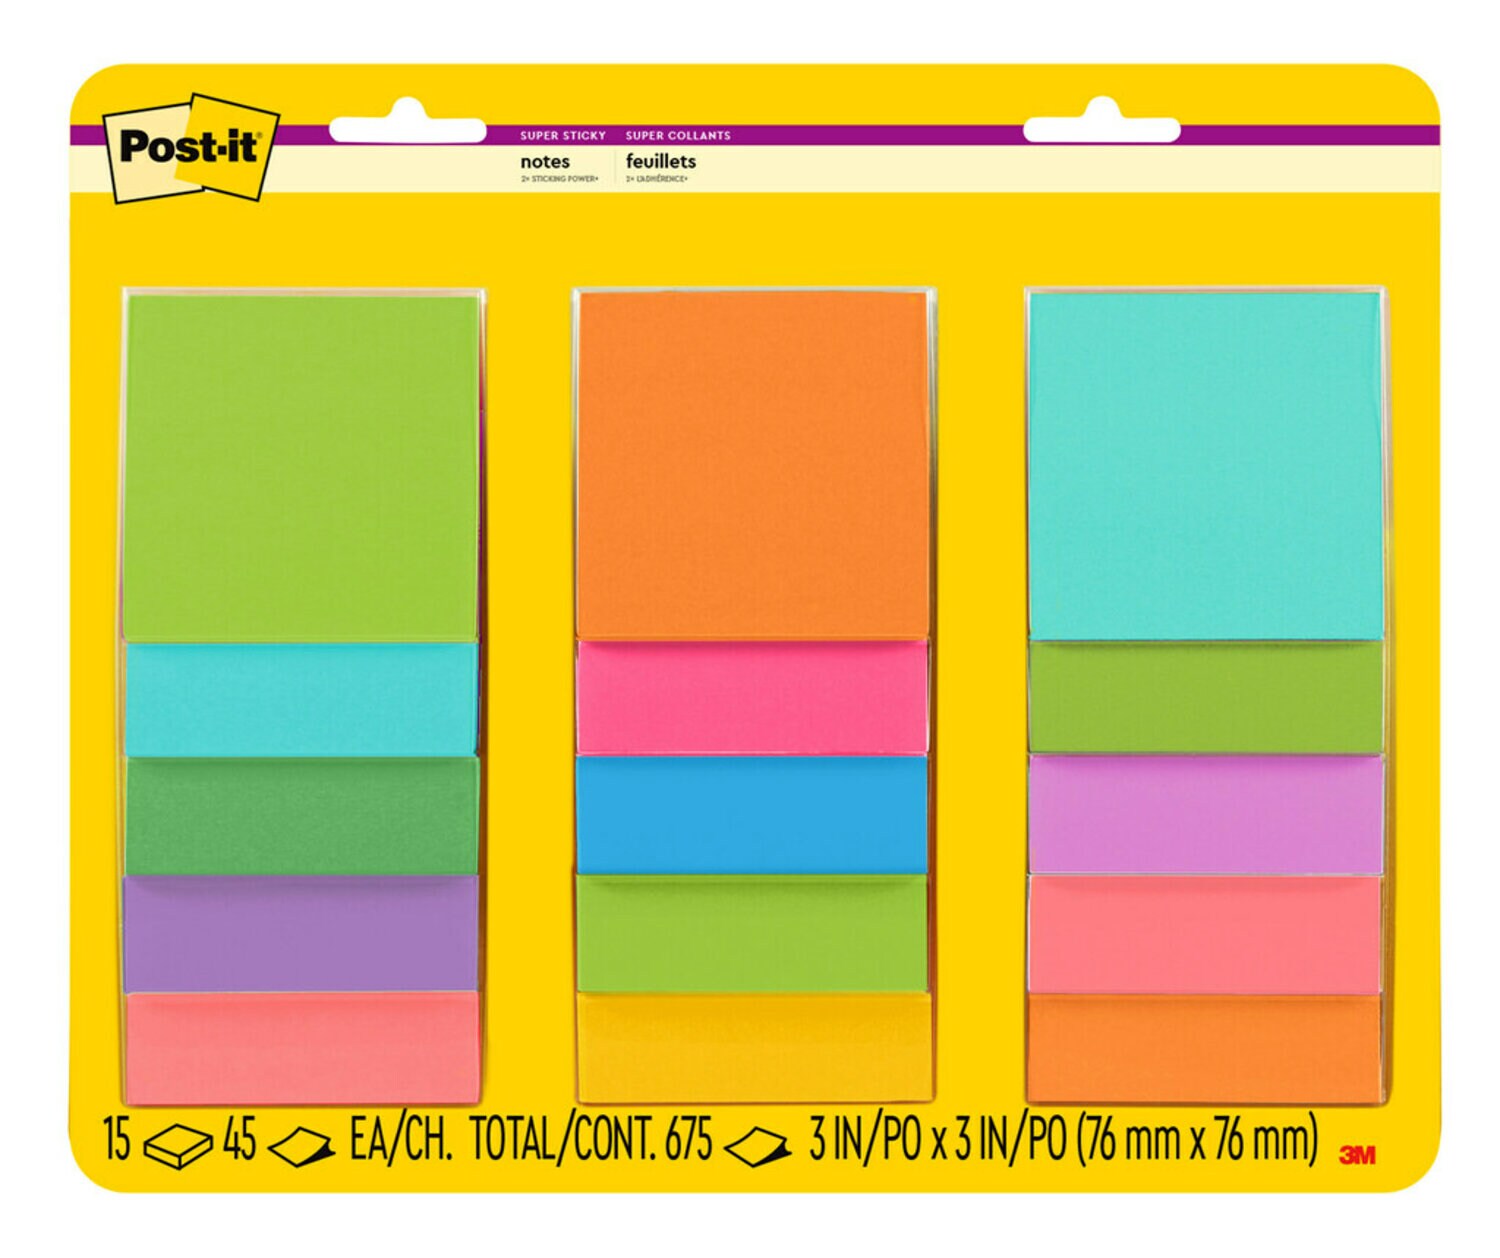 7100086887 - Post-it Notes 654-15SSMULTI2, 3 in x 3 in (76 mm x 76 mm)